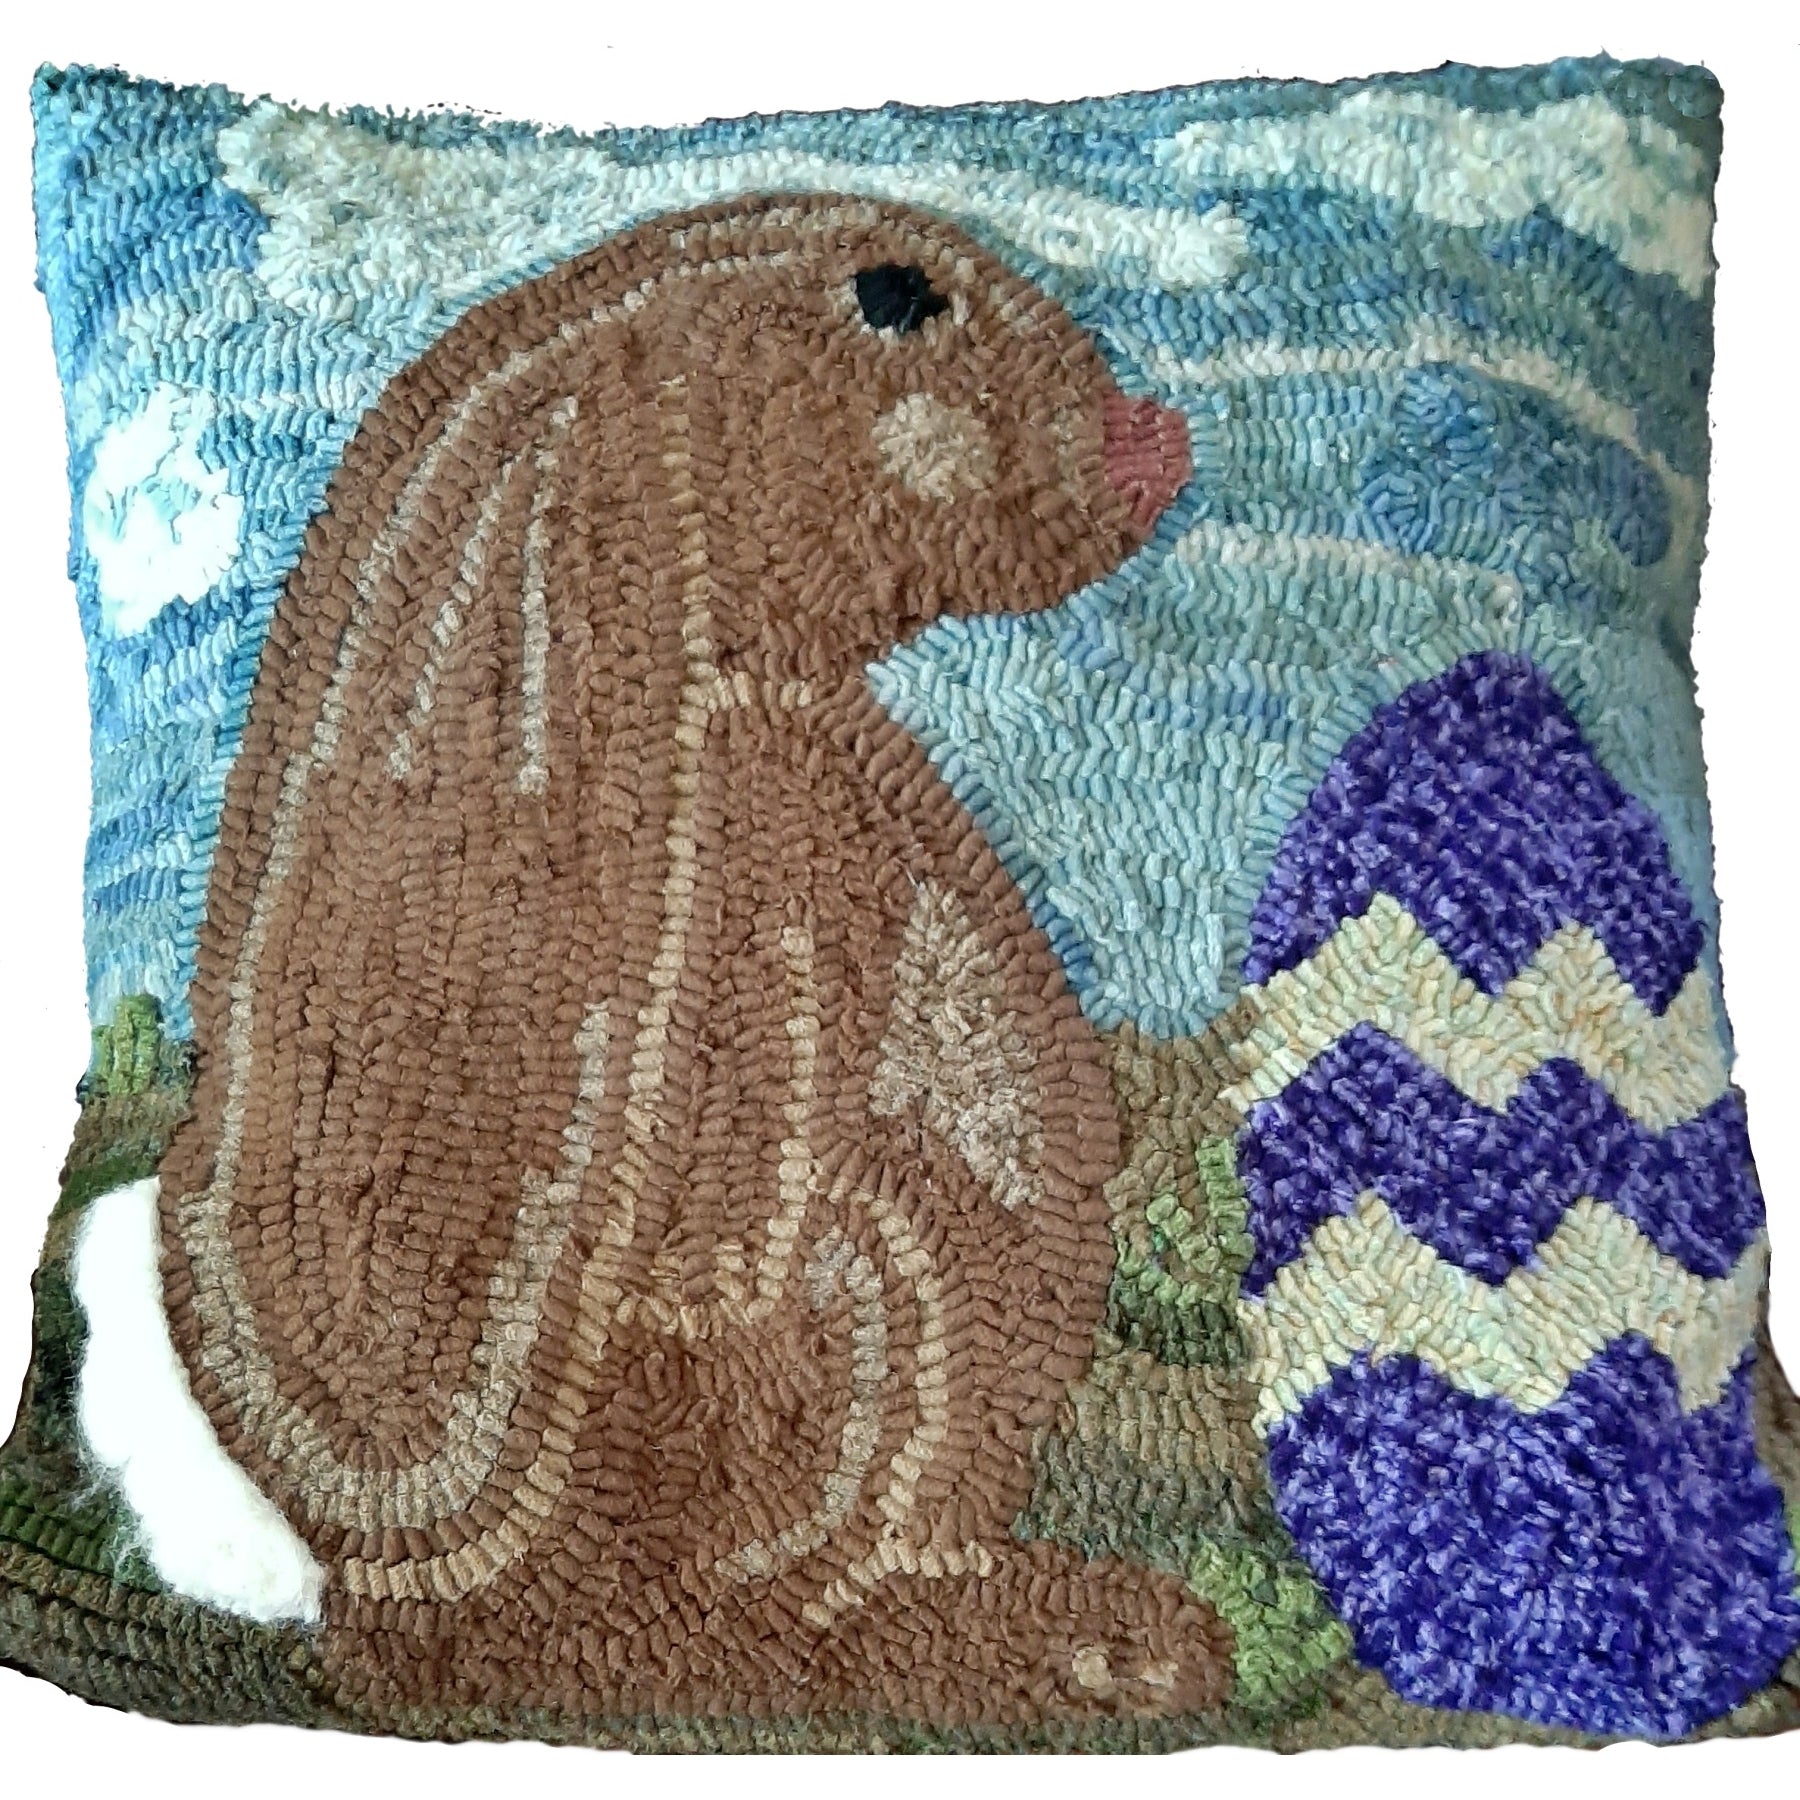 Leroy the Lop-Eared Bunny, rug hooked by Melissa Burger